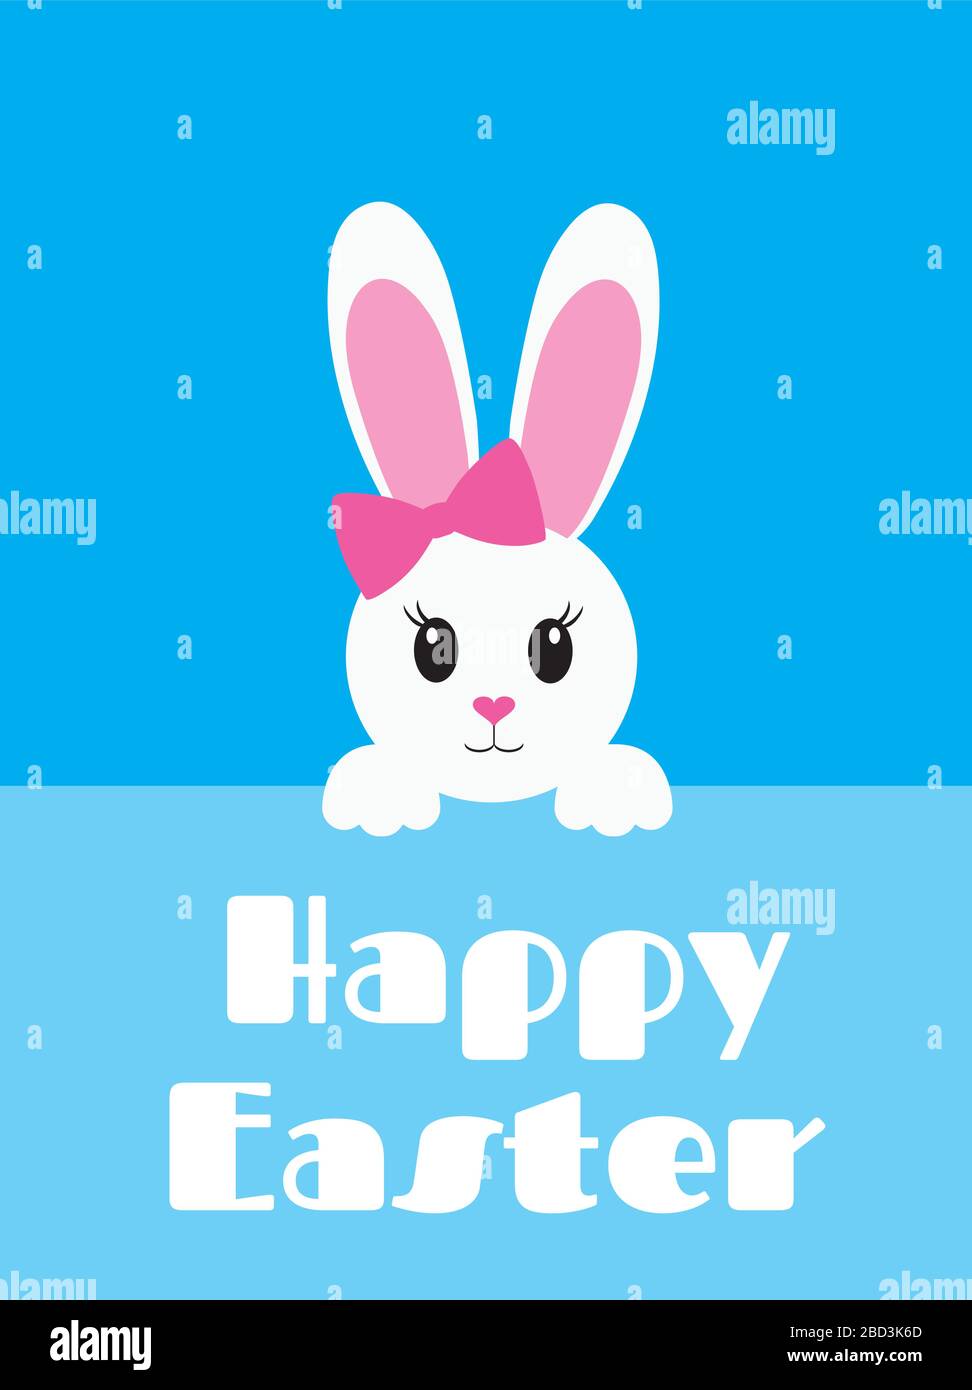 vector illustration of an Easter bunny. Cute bunny Easter background. Stock Vector